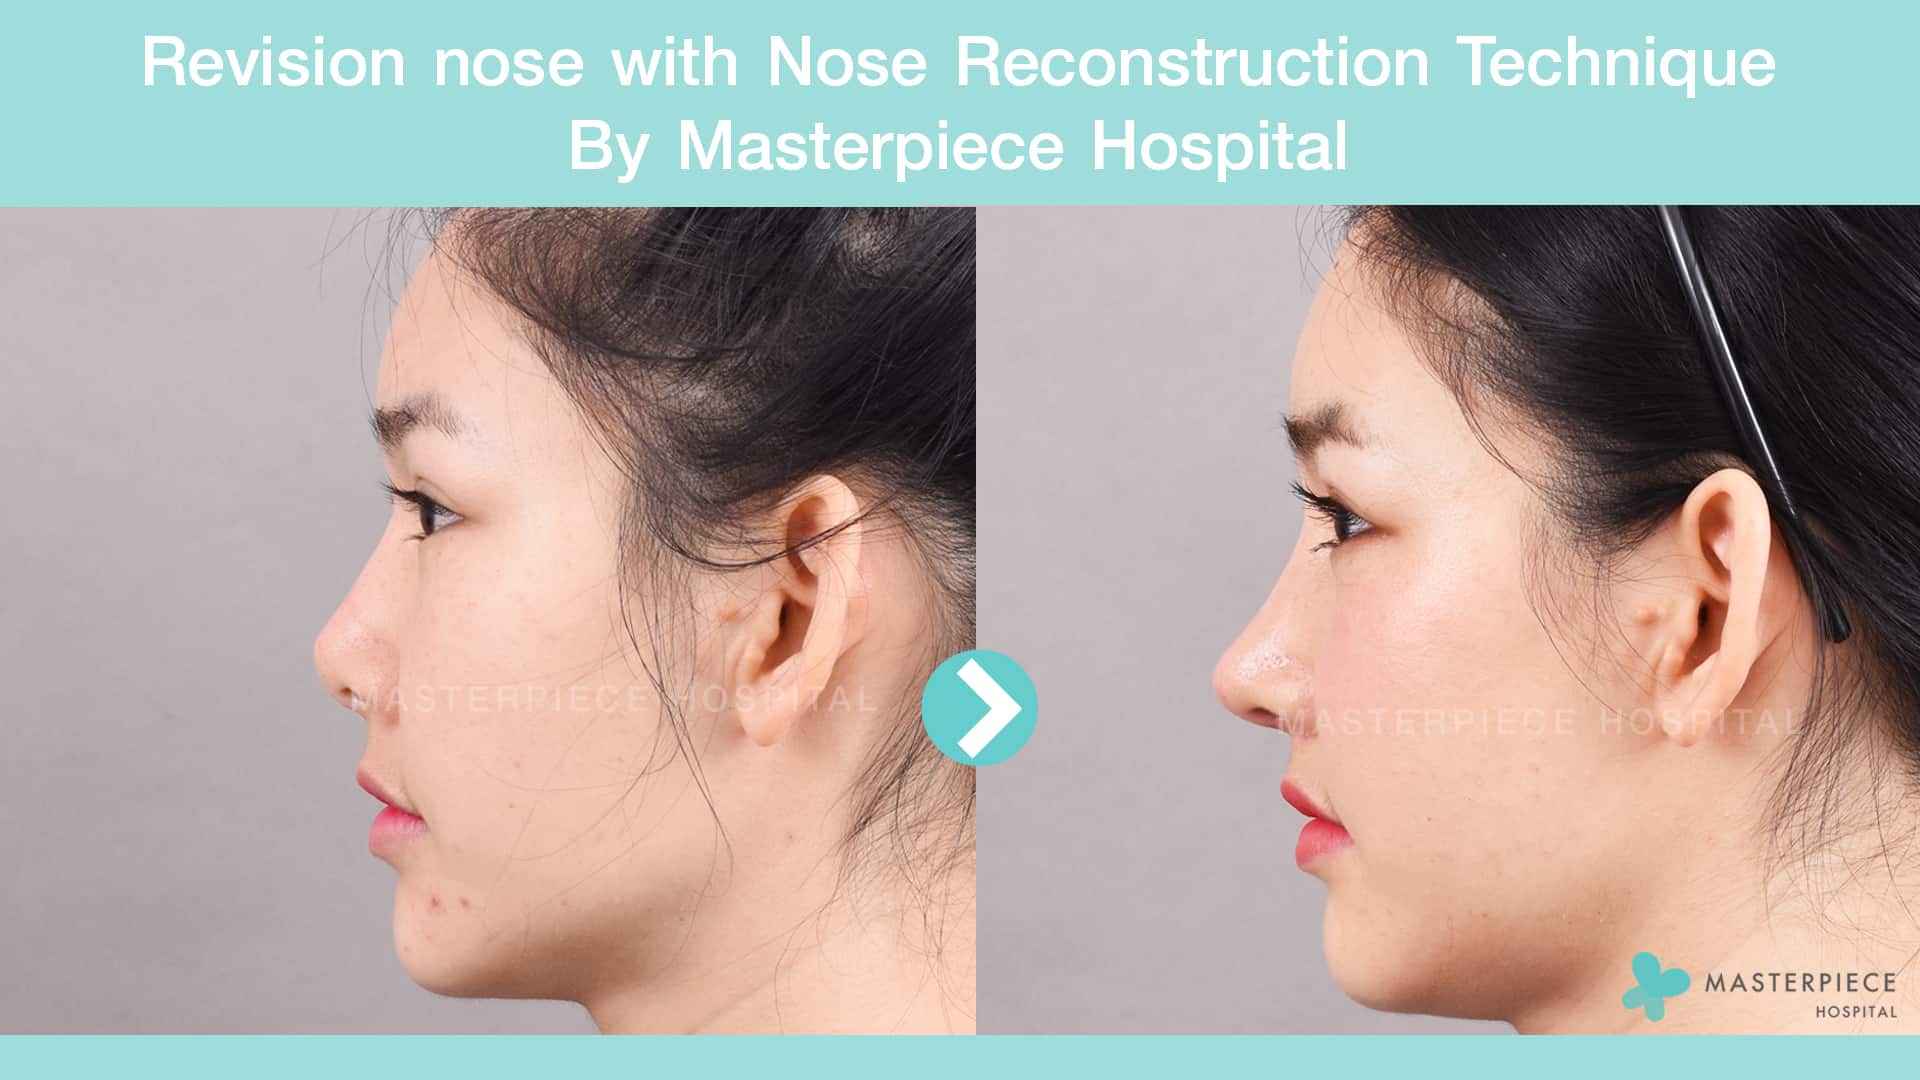 Revision nose with Nose Reconstruction Technique 02